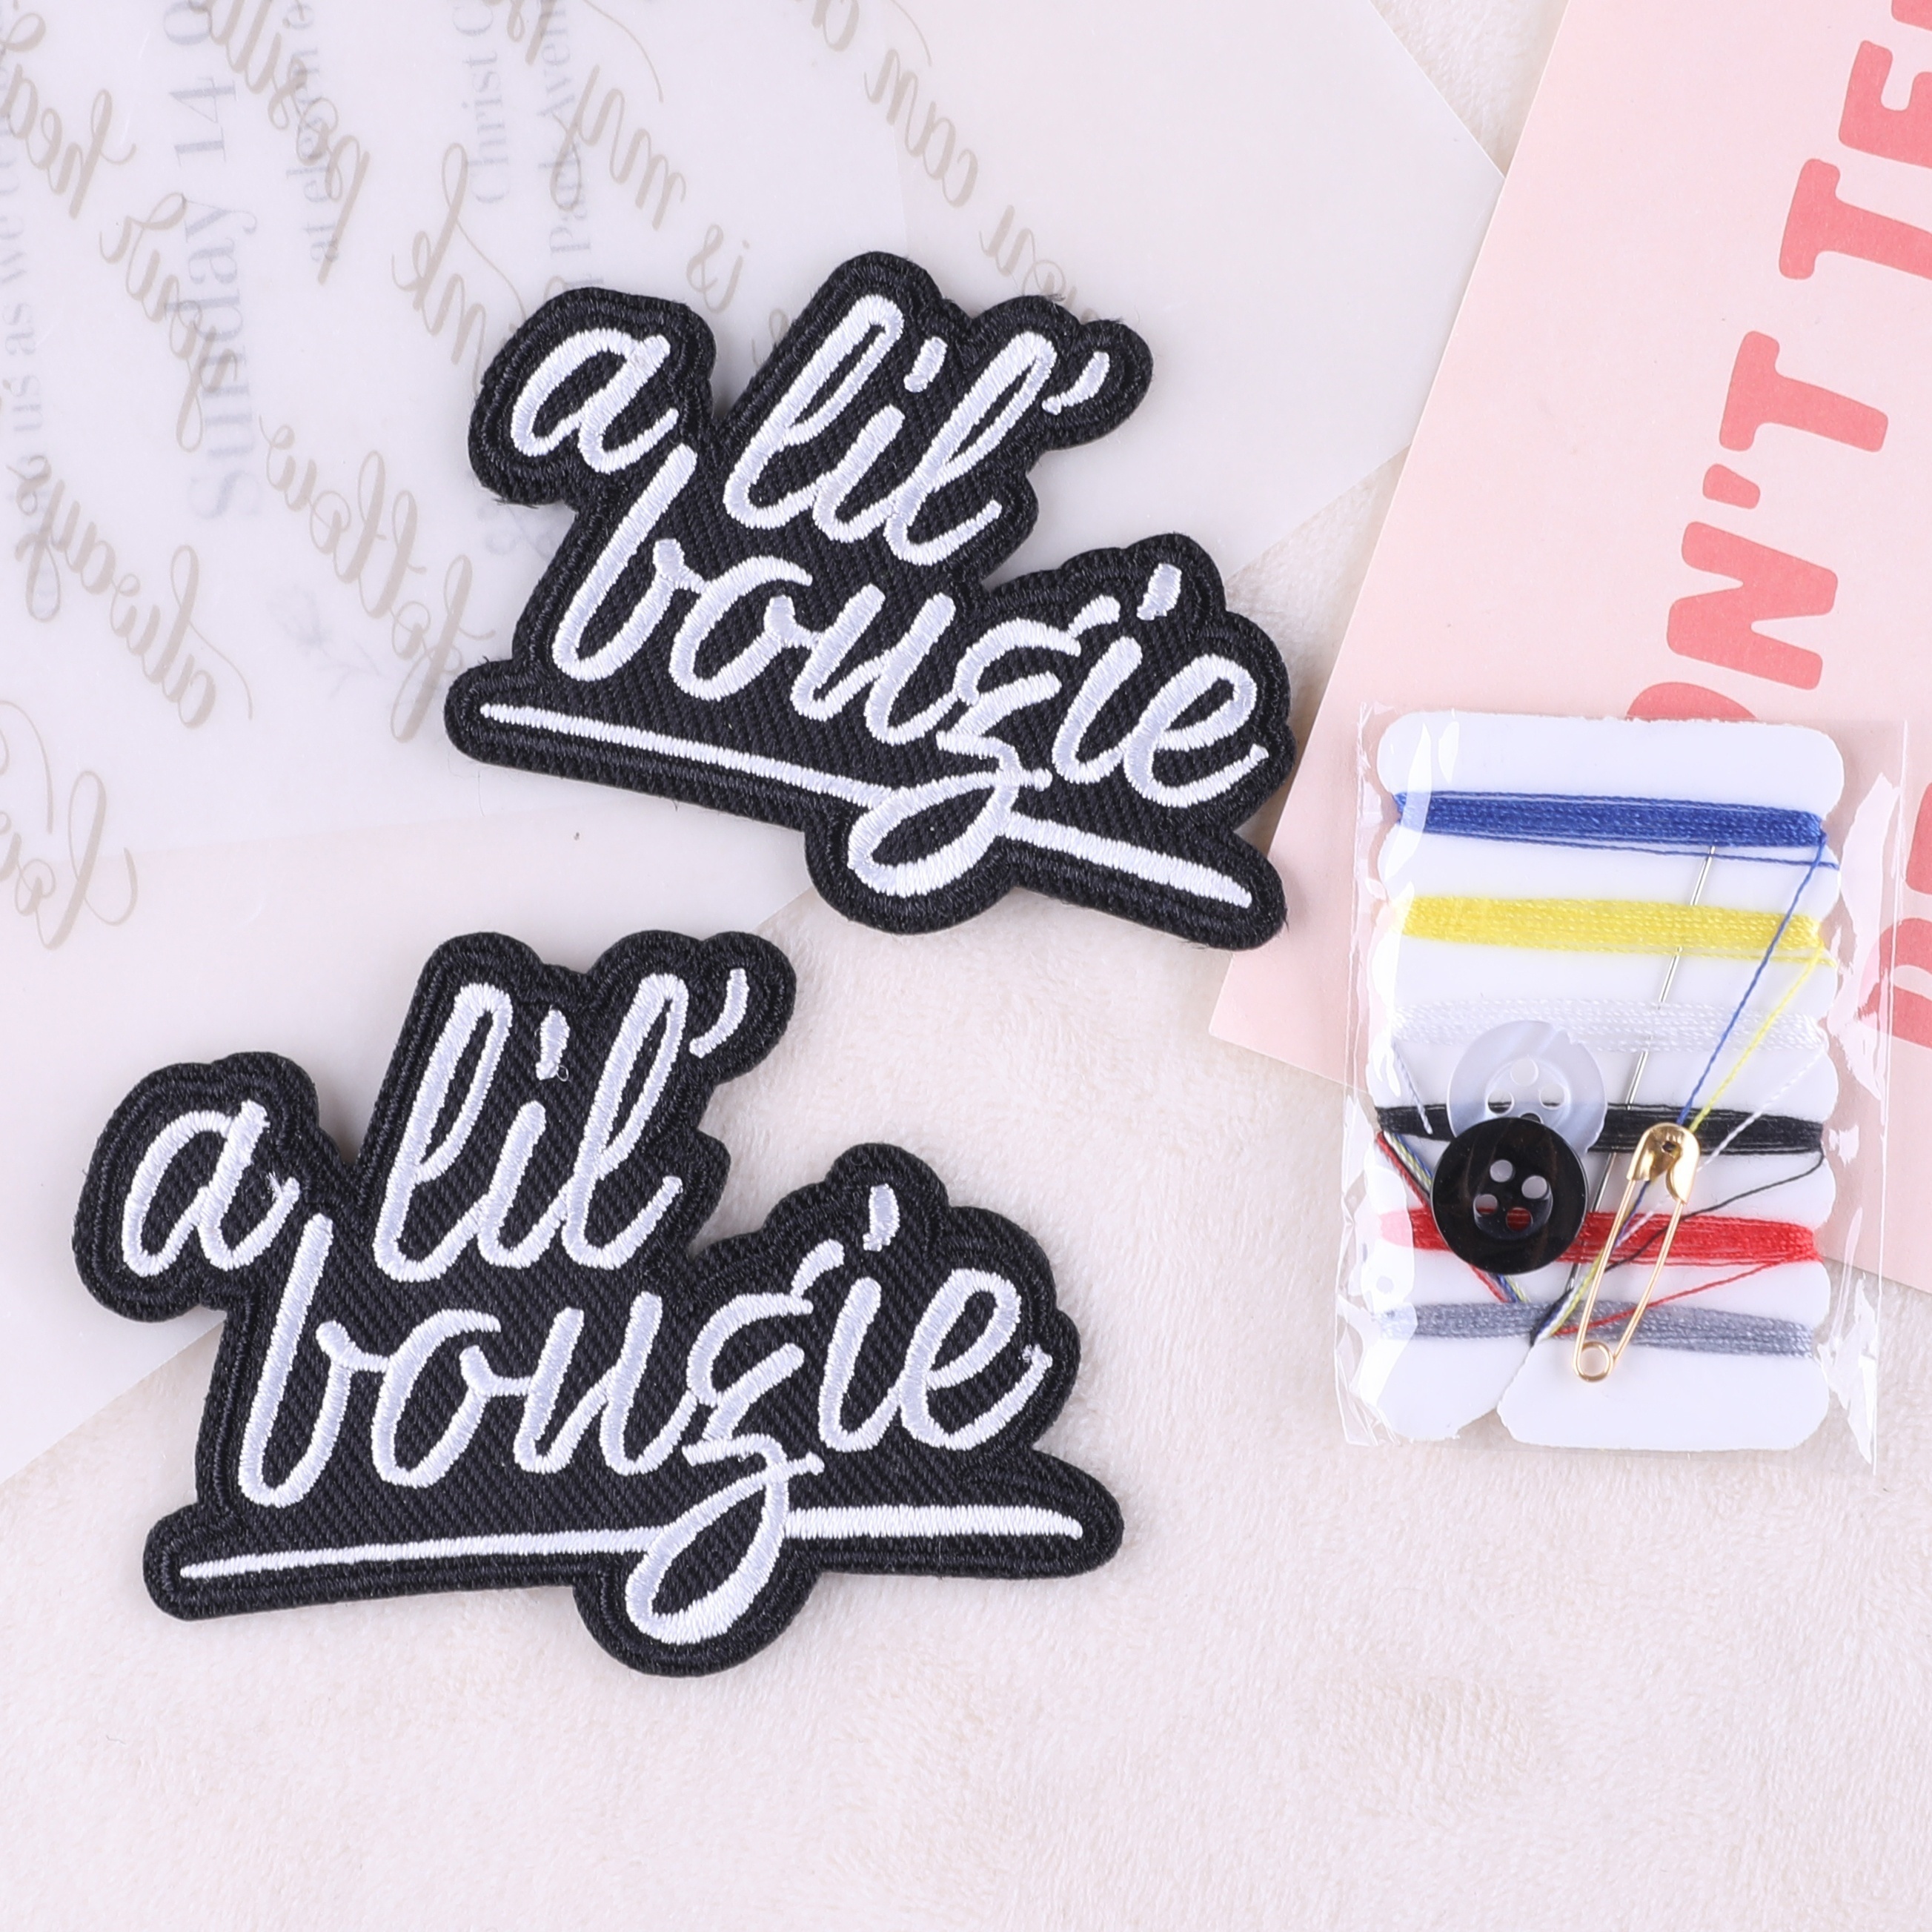 Exquisite embroidery stickers down jacket iron on patch for clothing  embroidery applique all kinds of clothing adhesive decals - AliExpress